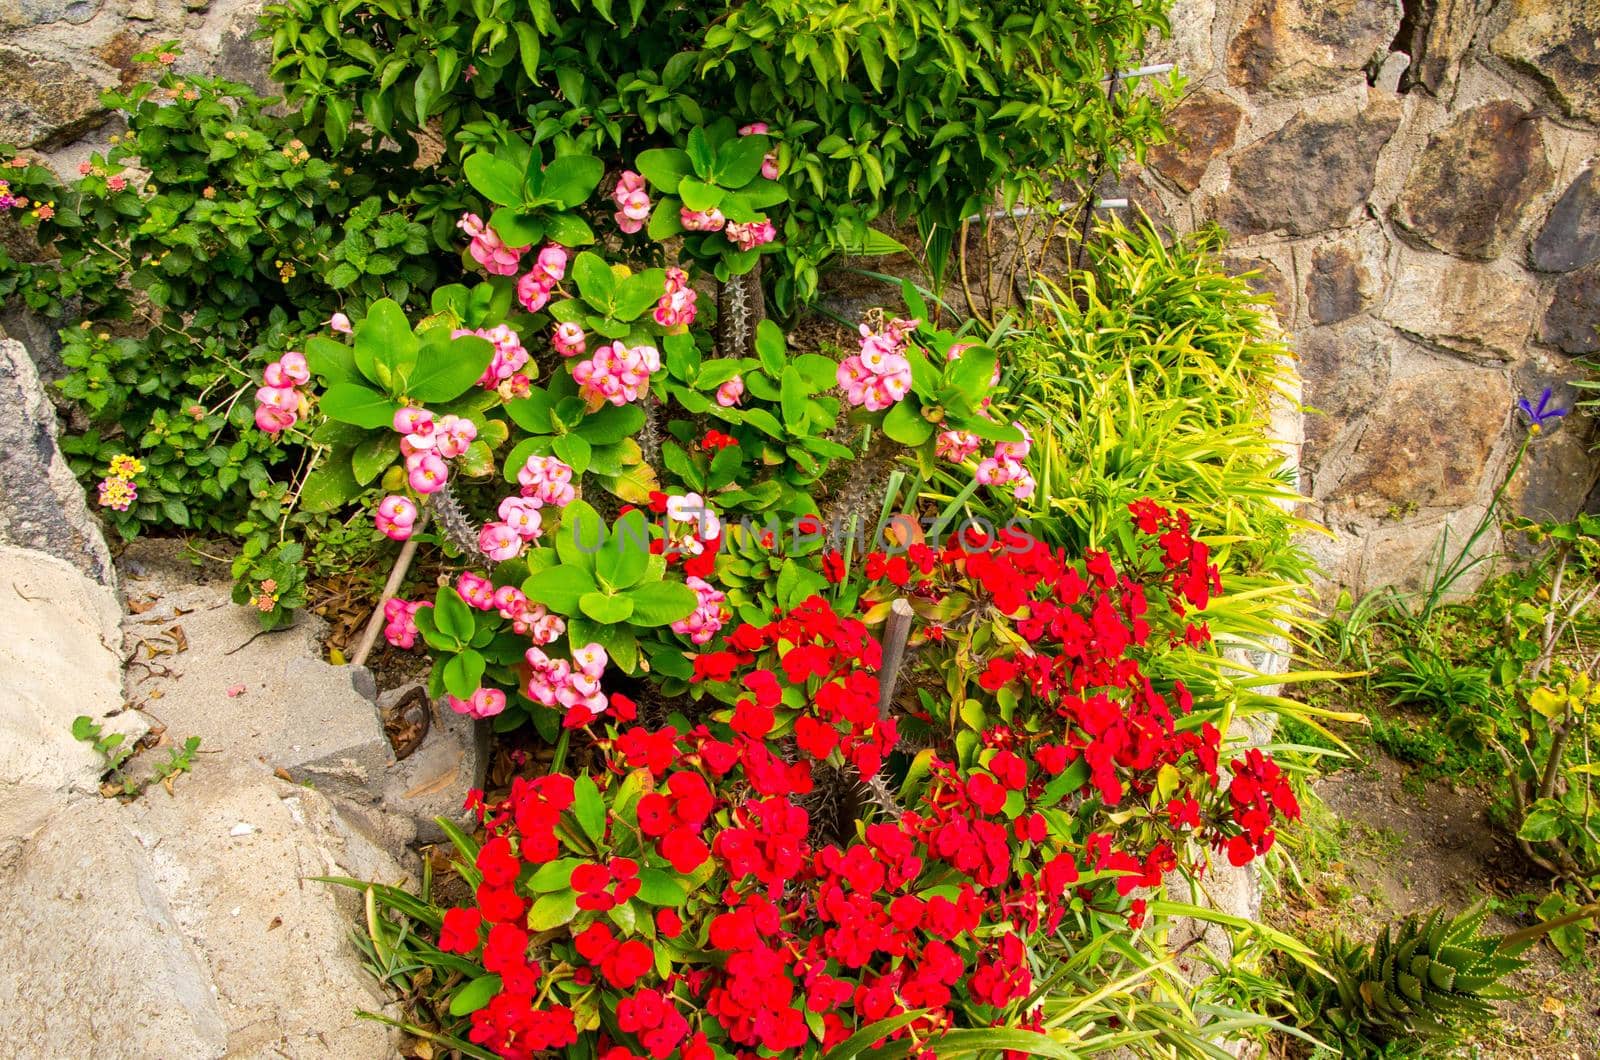 Red and rose small flowers with green leaves and grass on stone wall by Aliaksandr_Antanovich